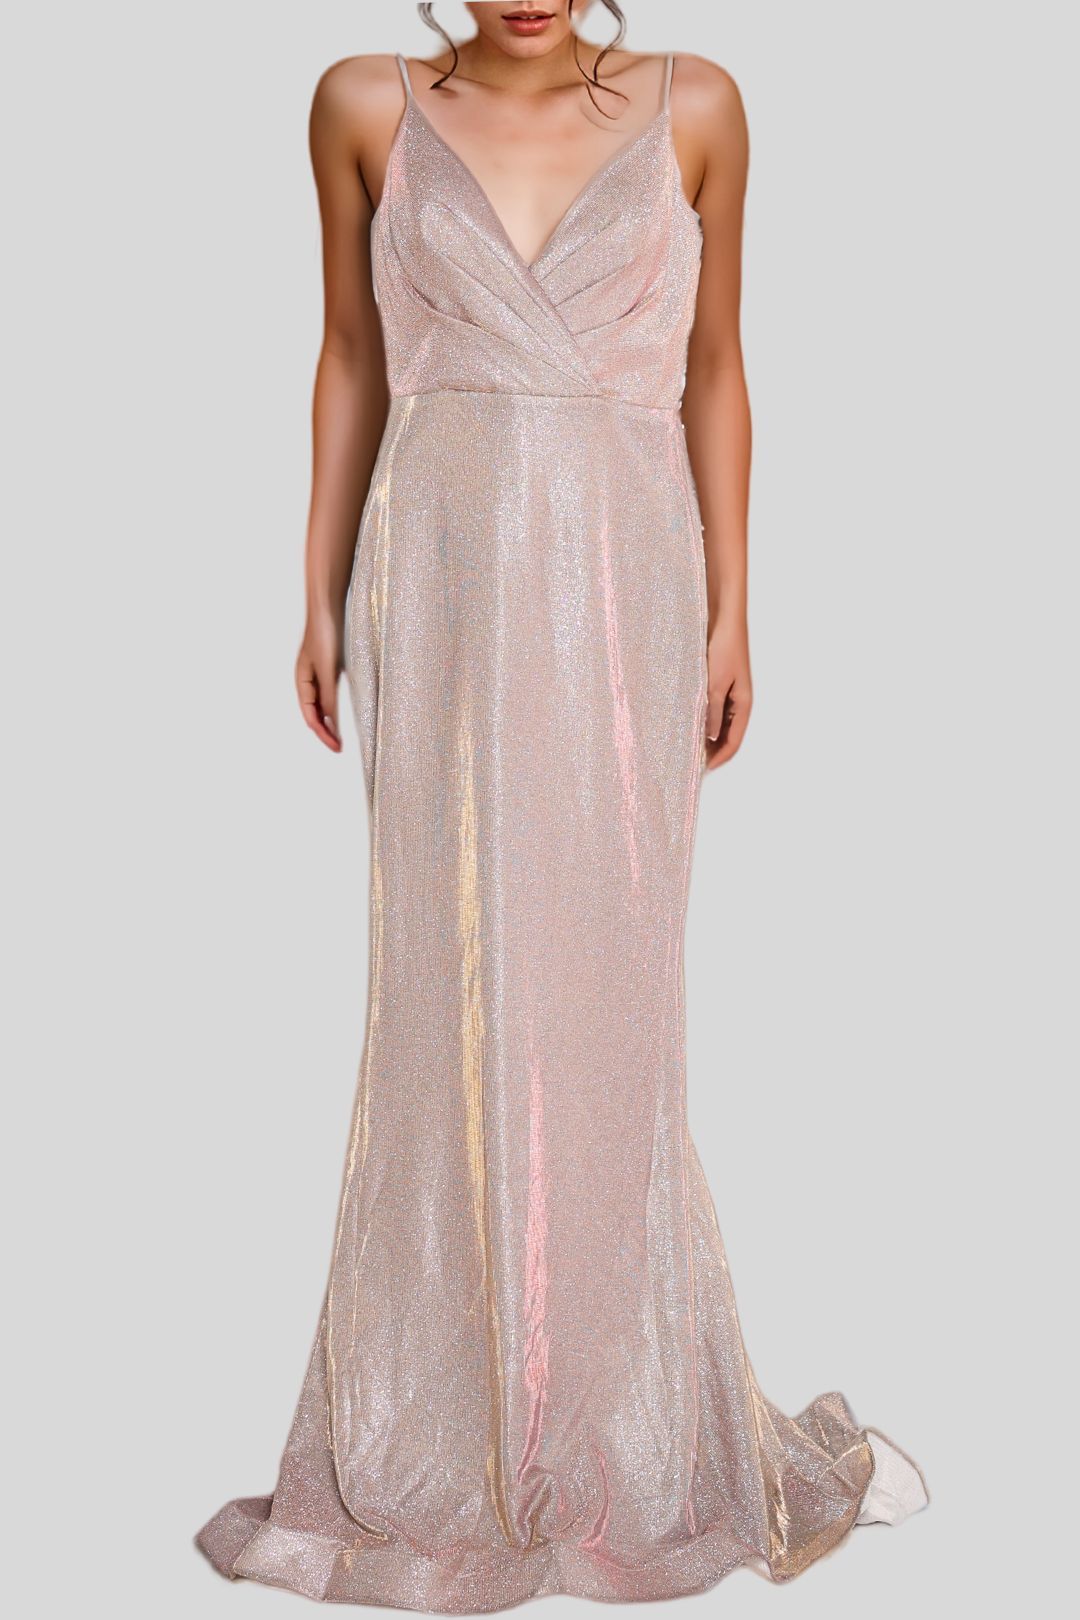 Tinaholy Pink Shimmer Formal Gown